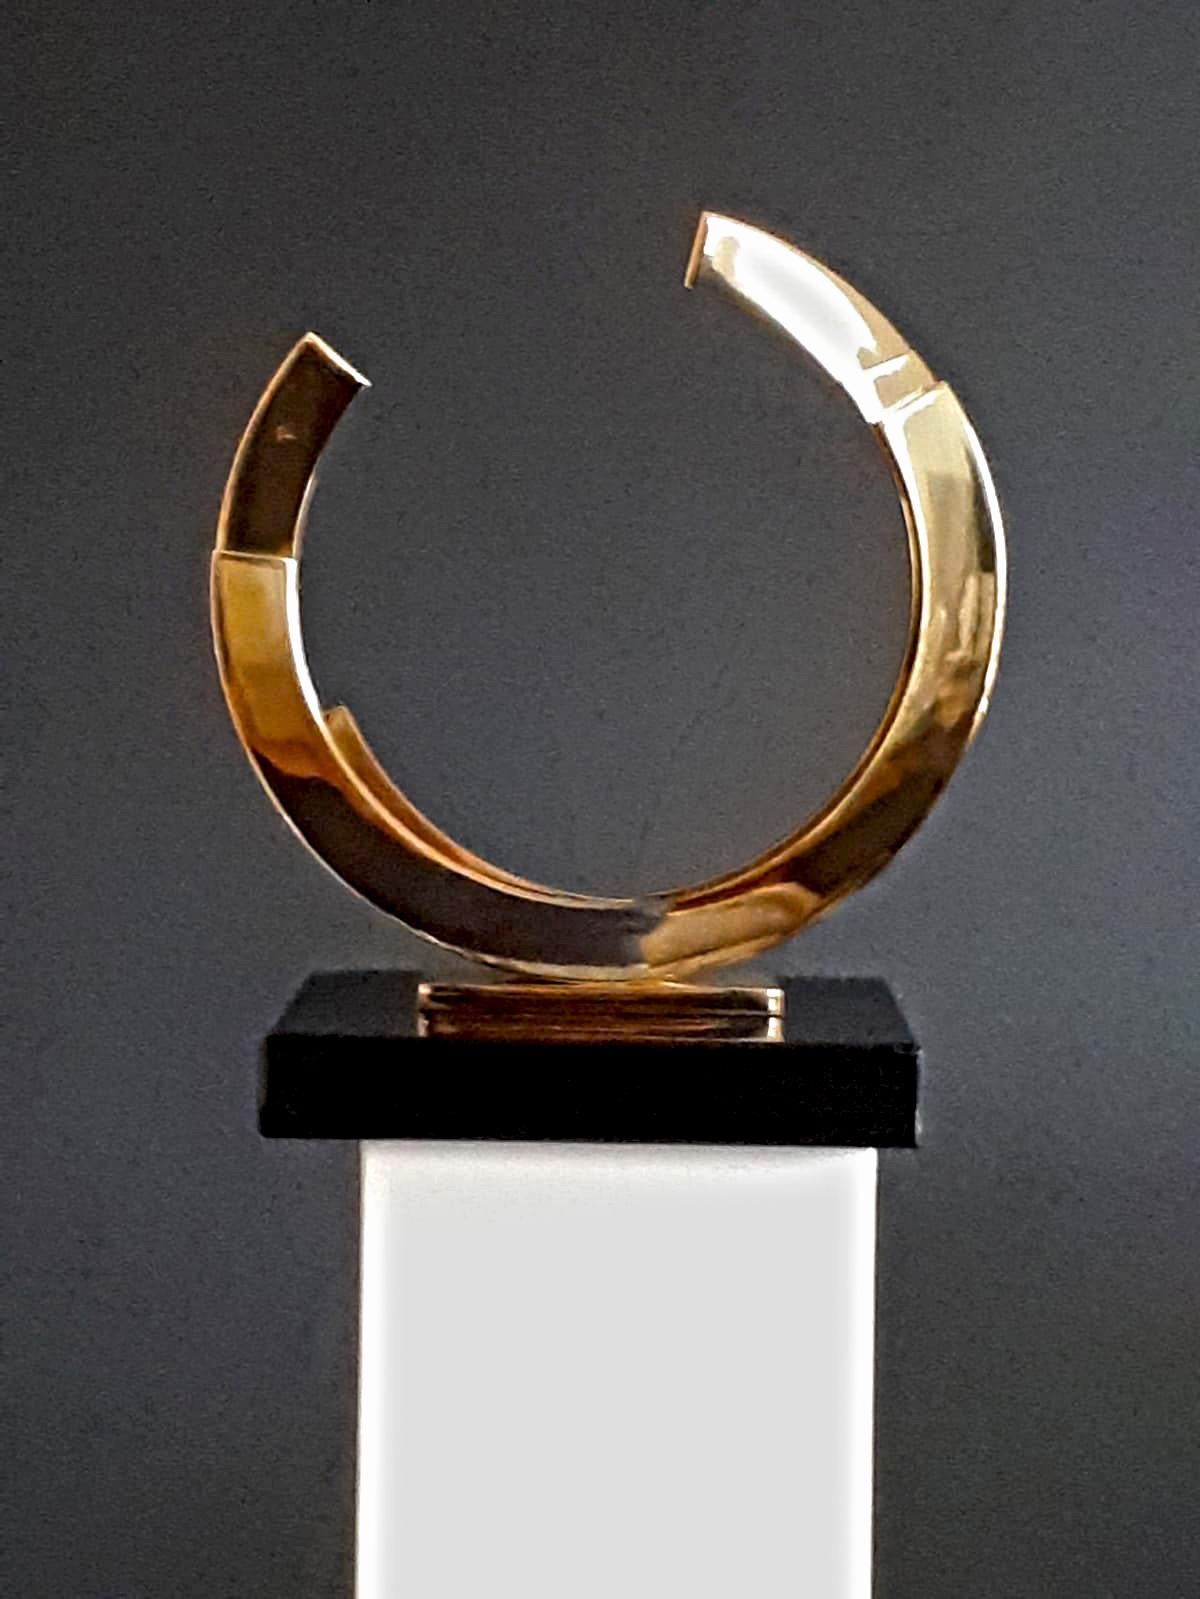 Golden Orbit by Kuno Vollet - Shiny Brass Circle Contemporary Minimal sculpture For Sale 10